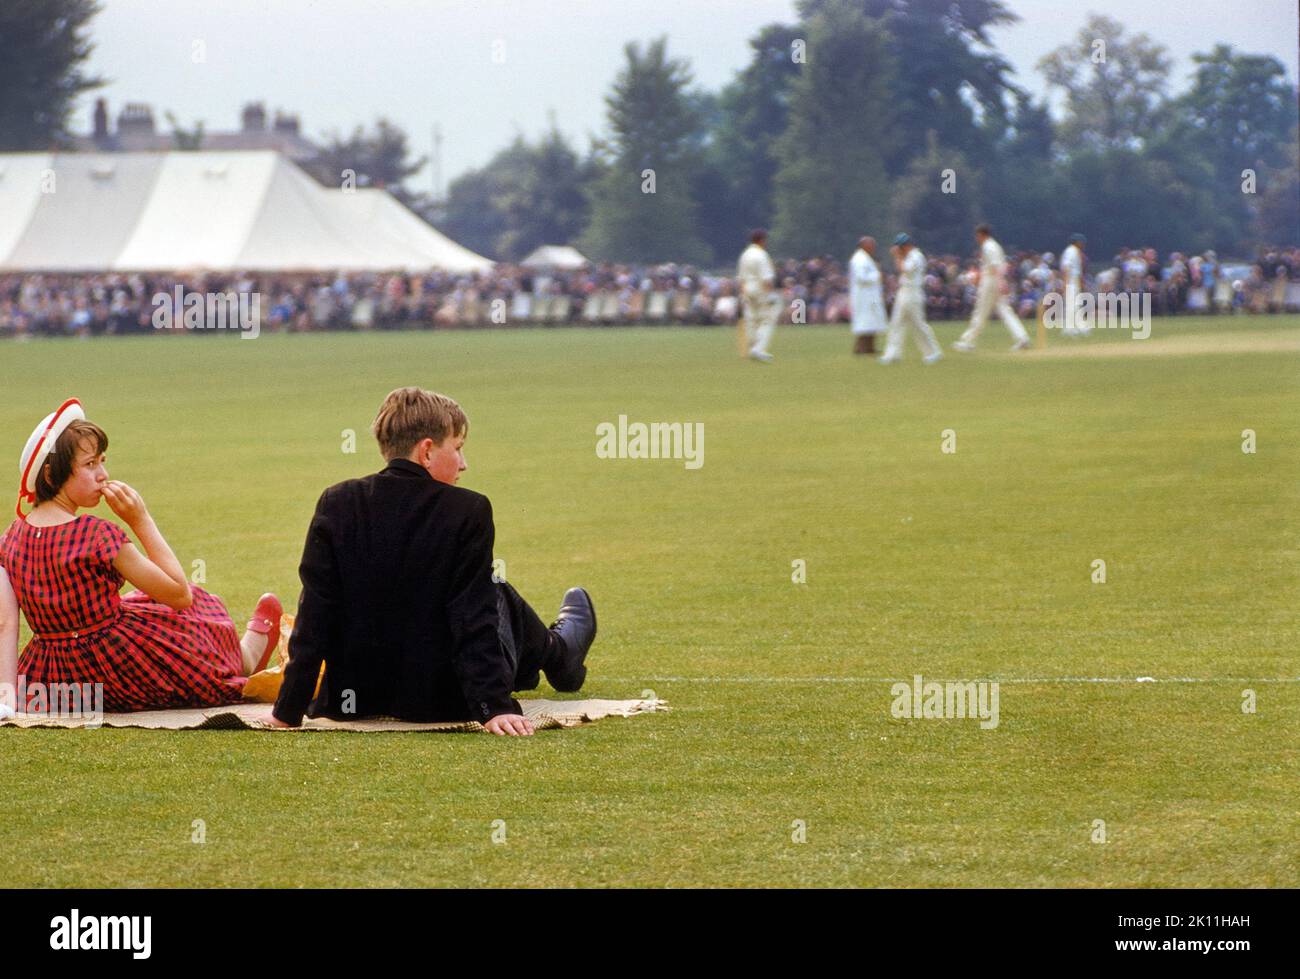 Teen Boy and Girl Watching Cricket Match all'evento "Fourth of June", Eton College, Eton, Berkshire, Inghilterra, UK, toni Frissell Collection, 4 giugno 1959 Foto Stock